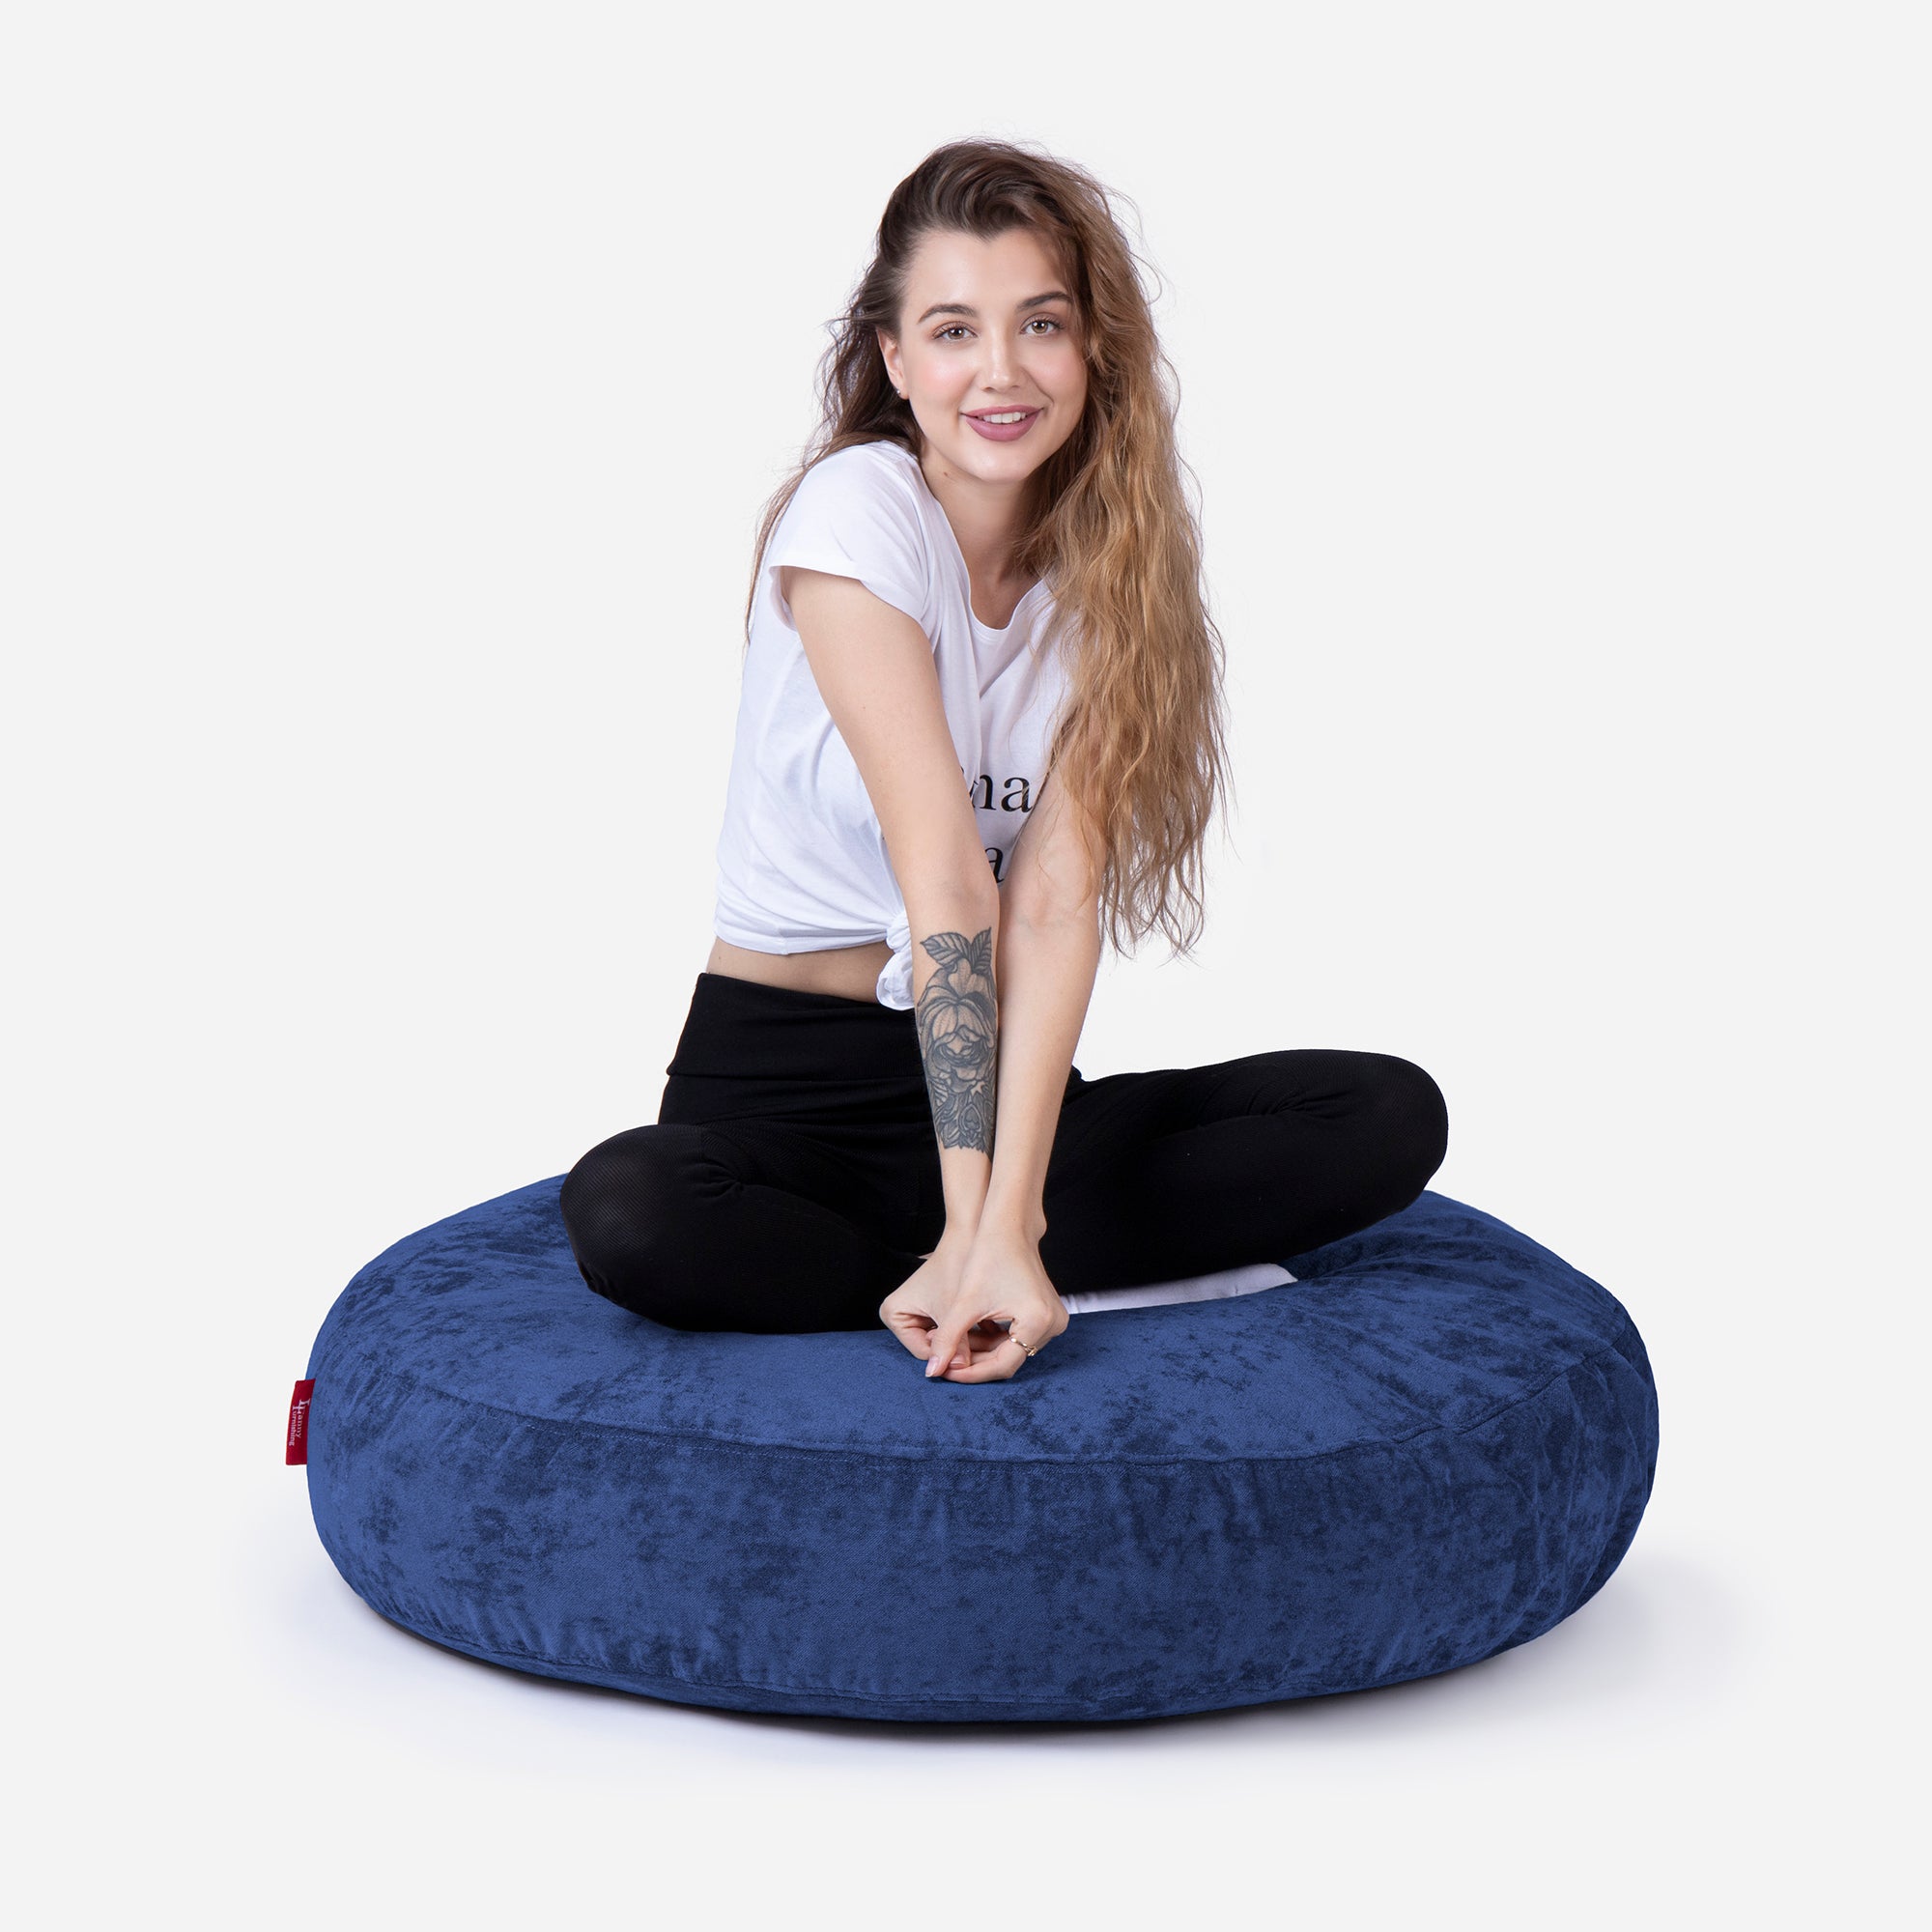 Pouf, Ottoman Blue color by Lanny with girl seating on it 